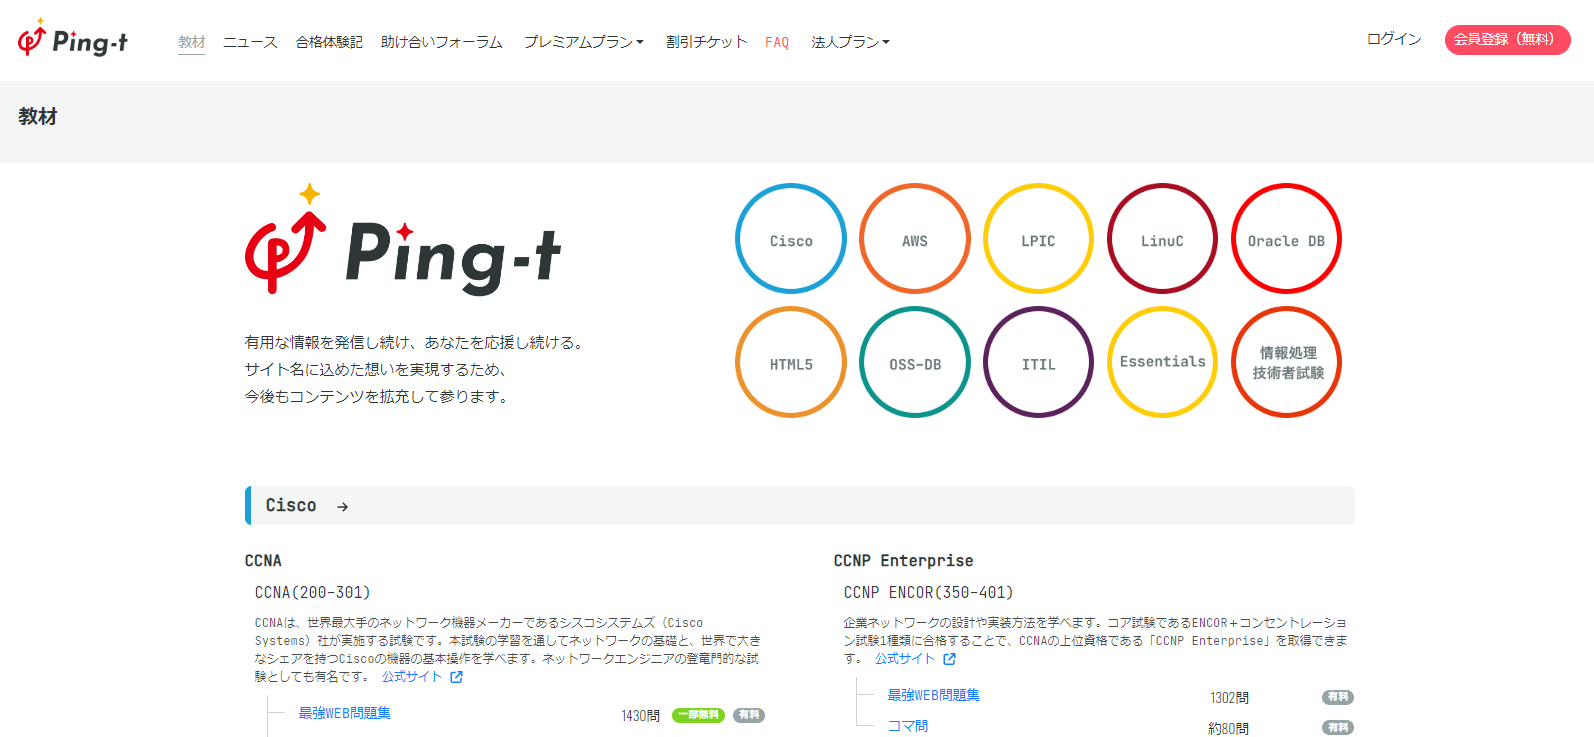 Ping-t